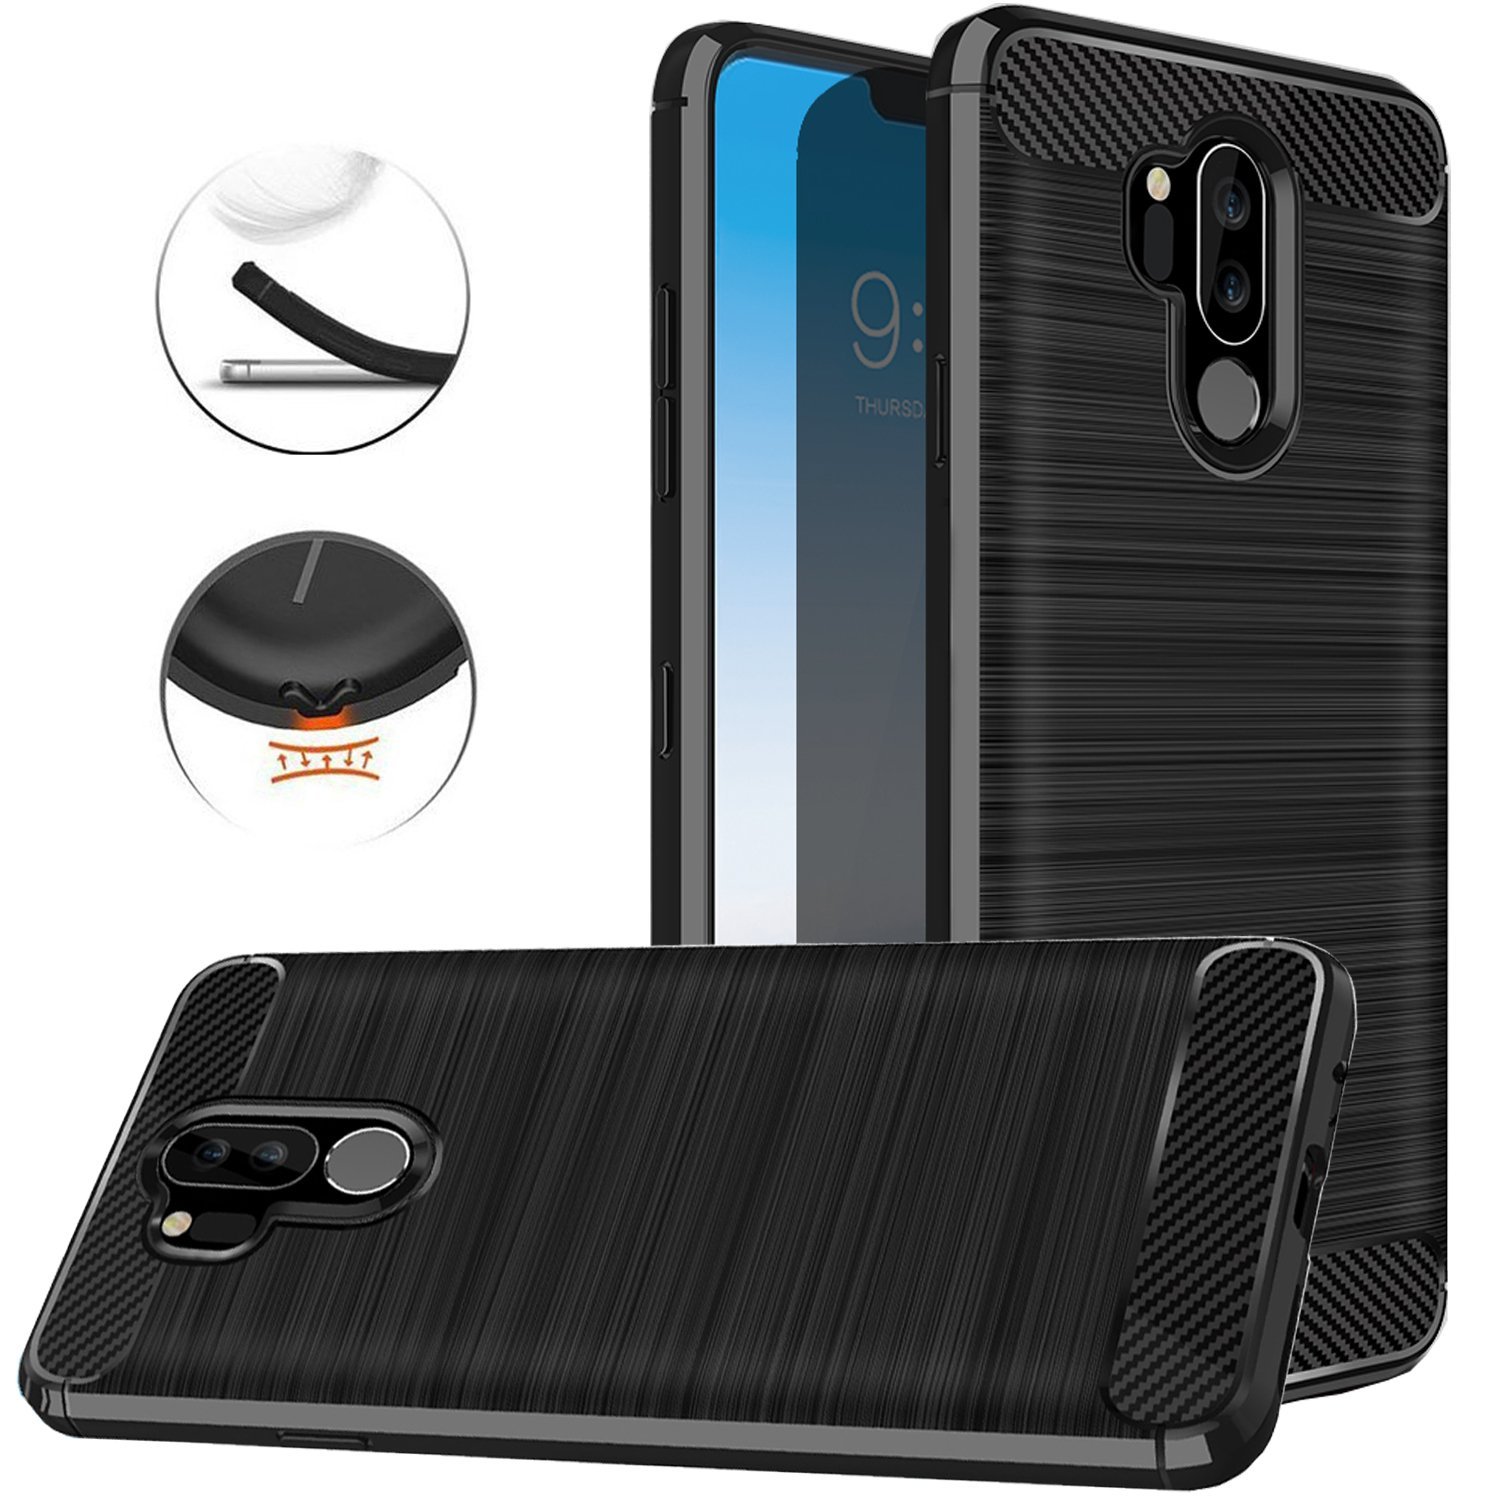 stand function anti-shock extra strong TPU silicone COOVY® Cover for LG G7 G7 ThinQ bumper case colour navy blue double layer plastic